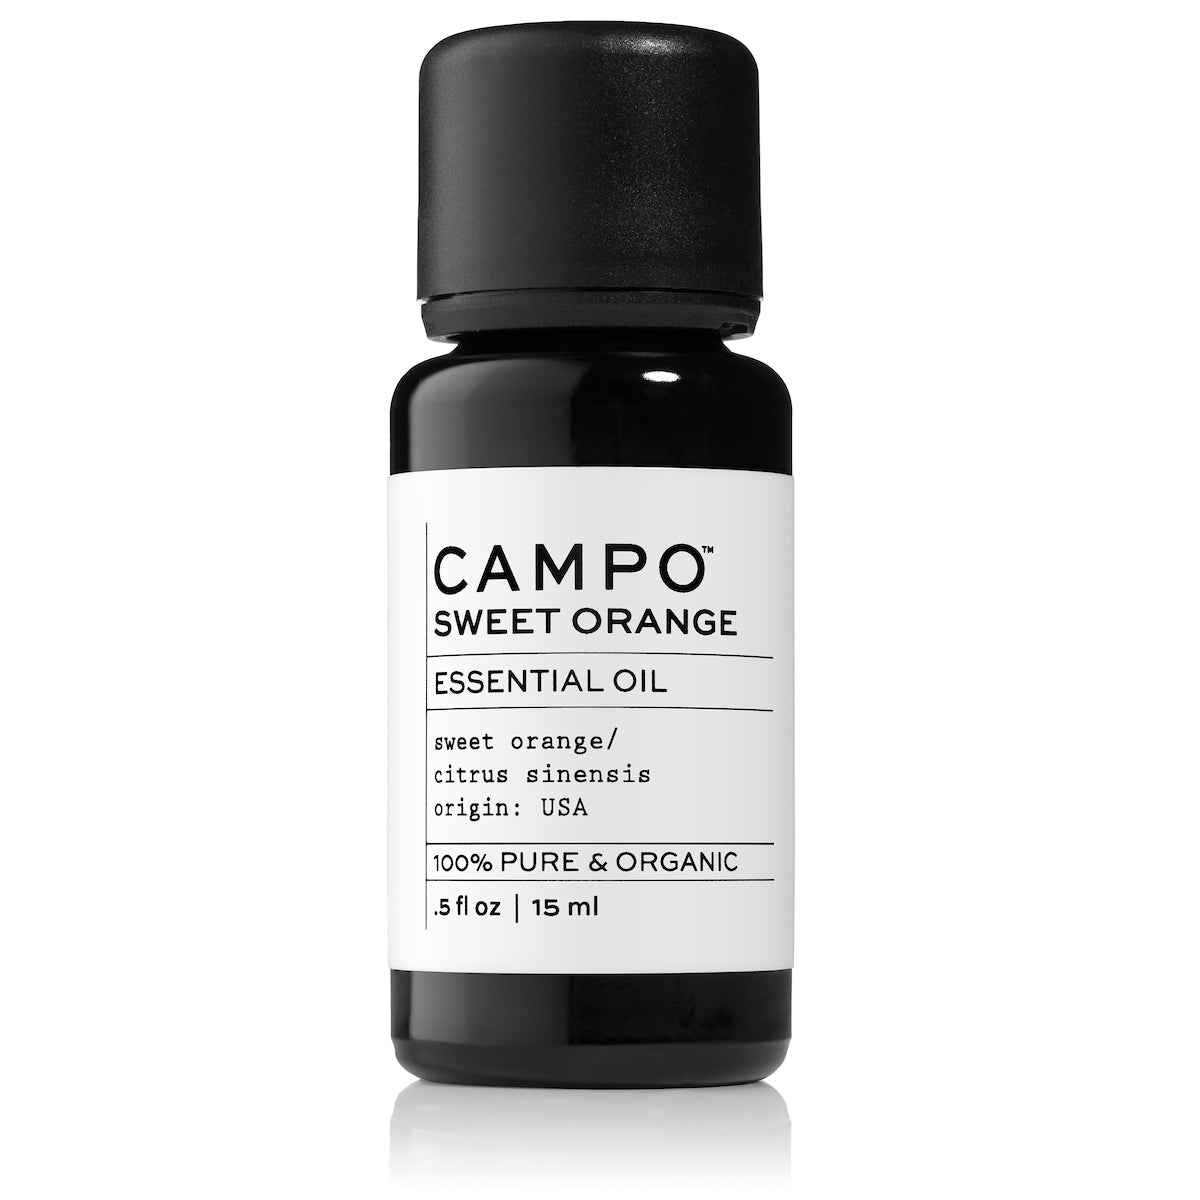 Campo Beauty SWEET ORANGE Blend 15 ml Essential Oil with Sweet Orange and Citrus Sinensis